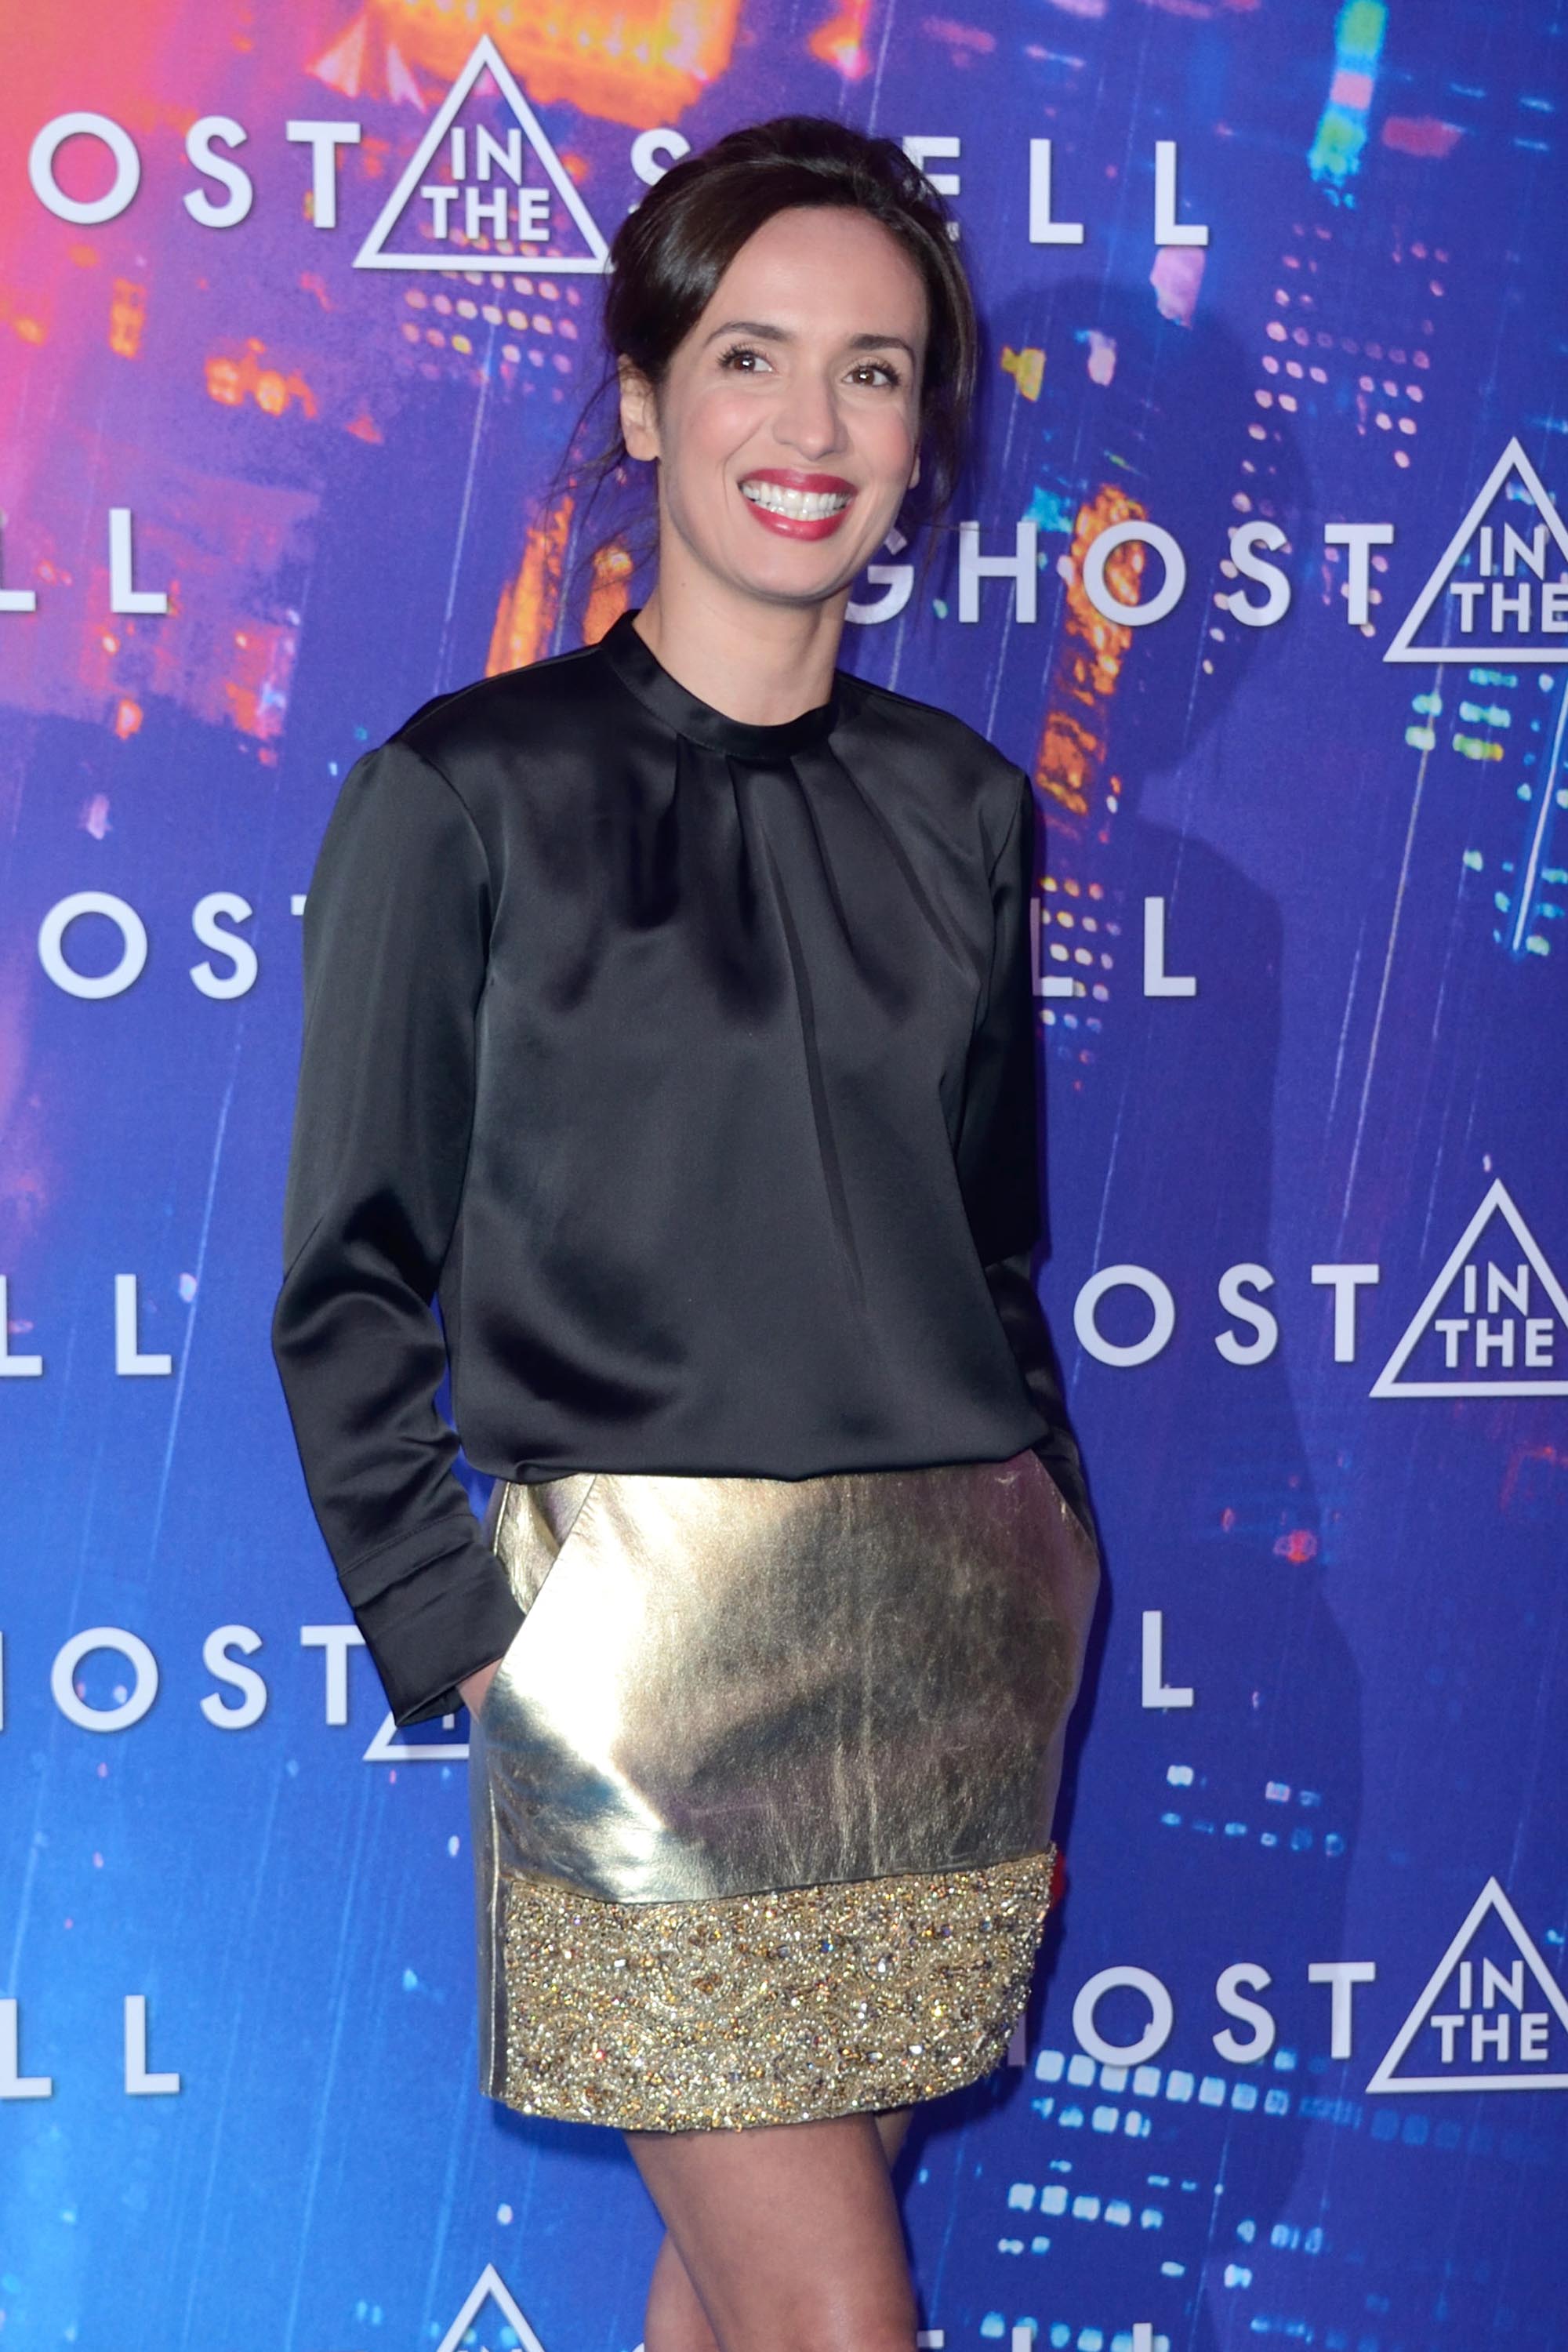 Amelle Chahbi attends Ghost in the Shell Premiere